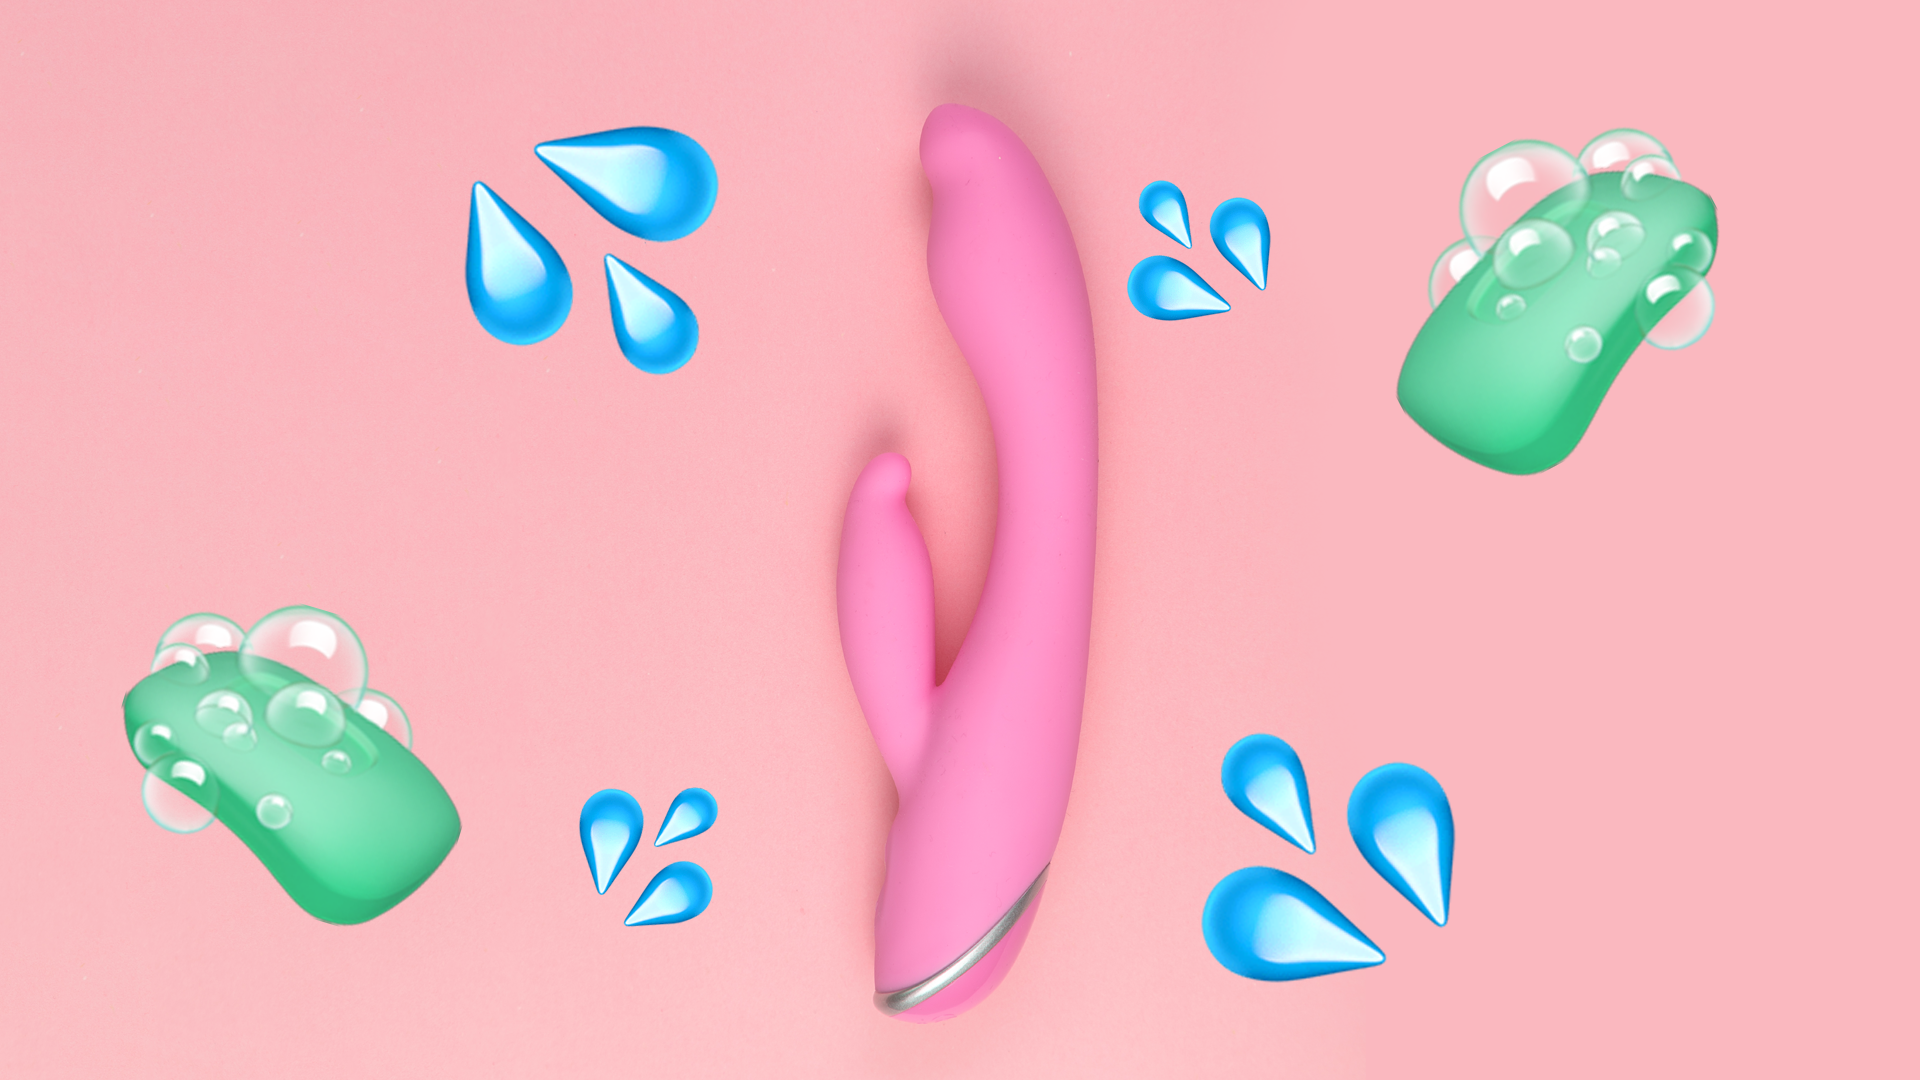 pink sex toy surrounded by water drop and soap emojis